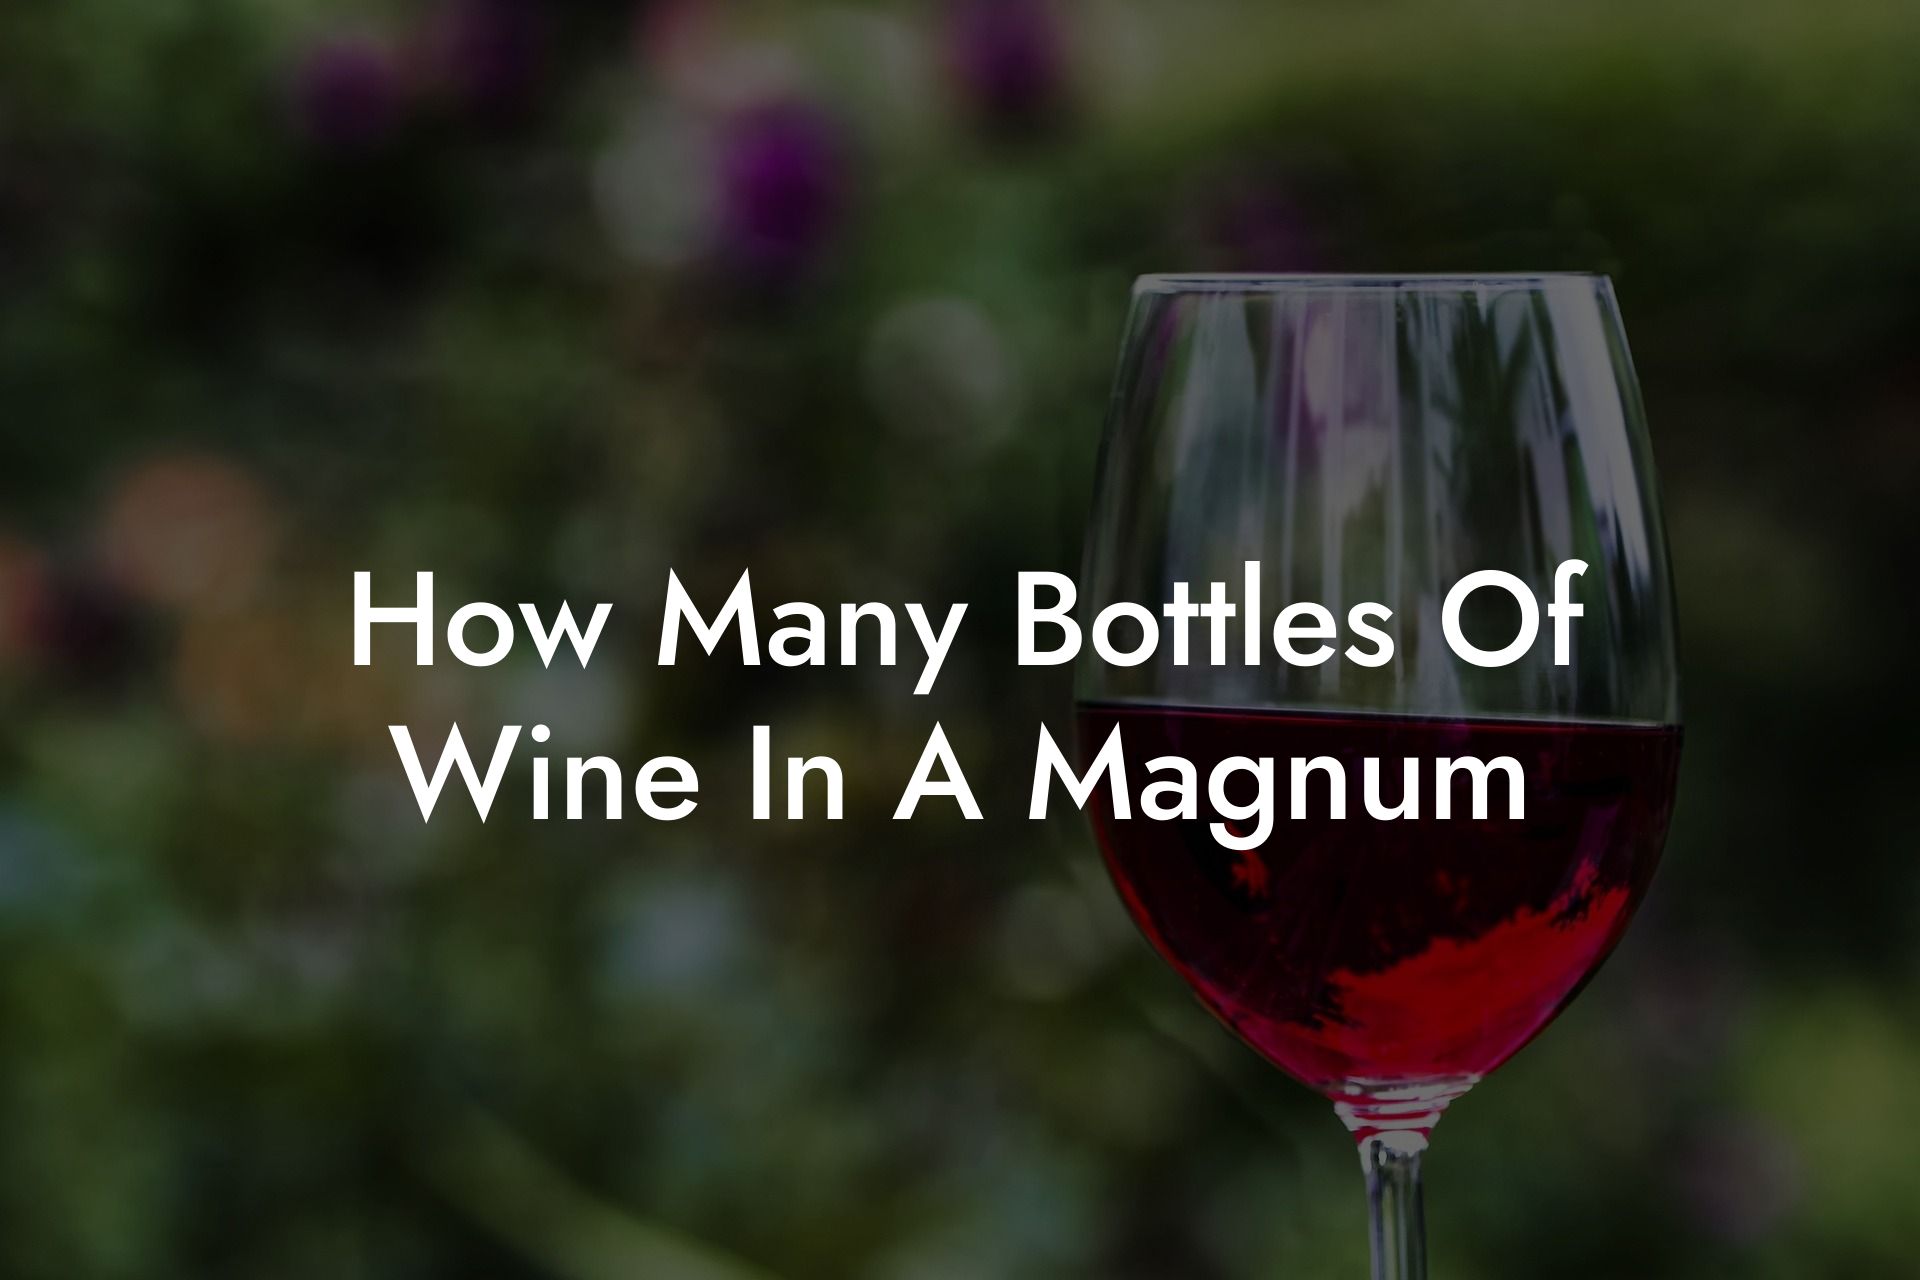 How Many Bottles Of Wine In A Magnum